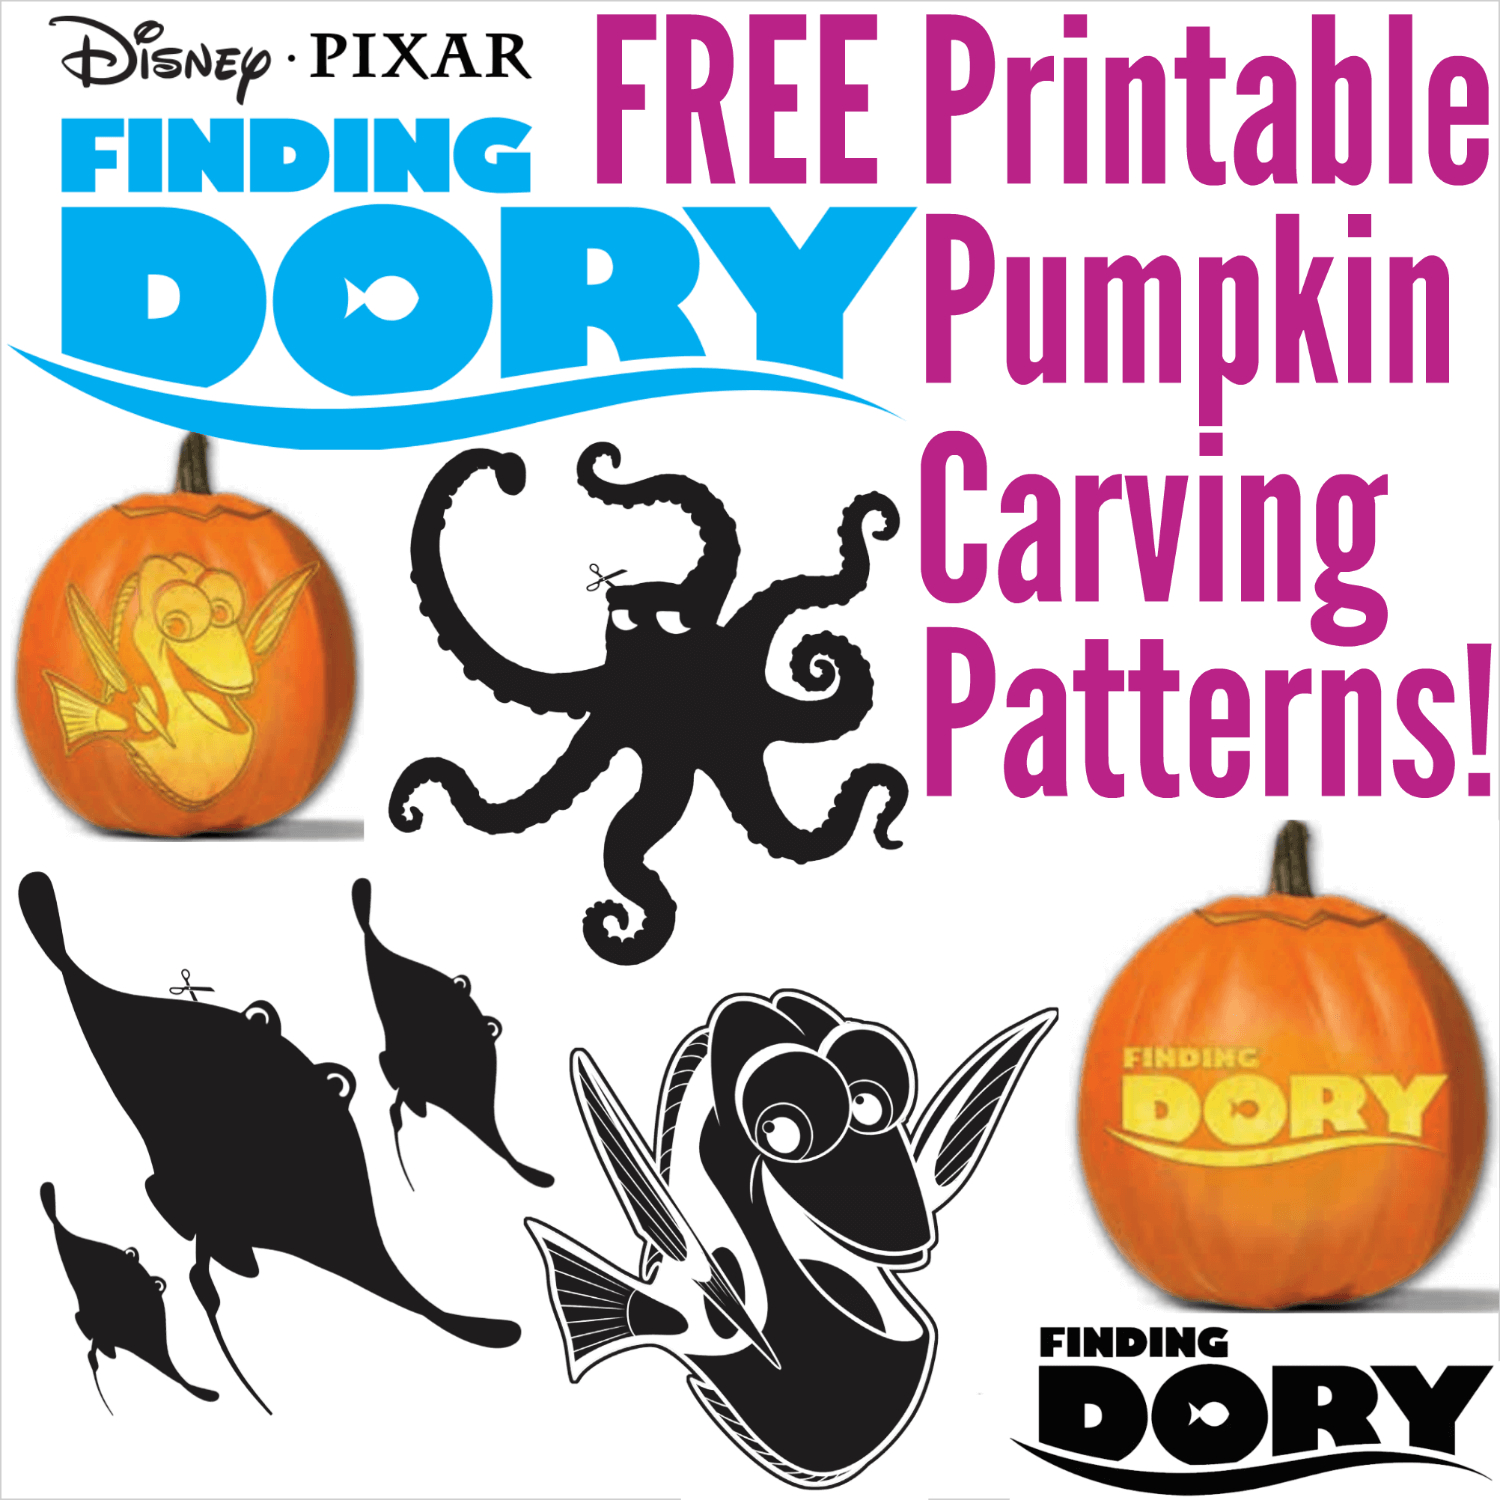 Free Finding Dory Pumpkin Carving Patterns To Print! - Pumpkin Patterns Free Printable